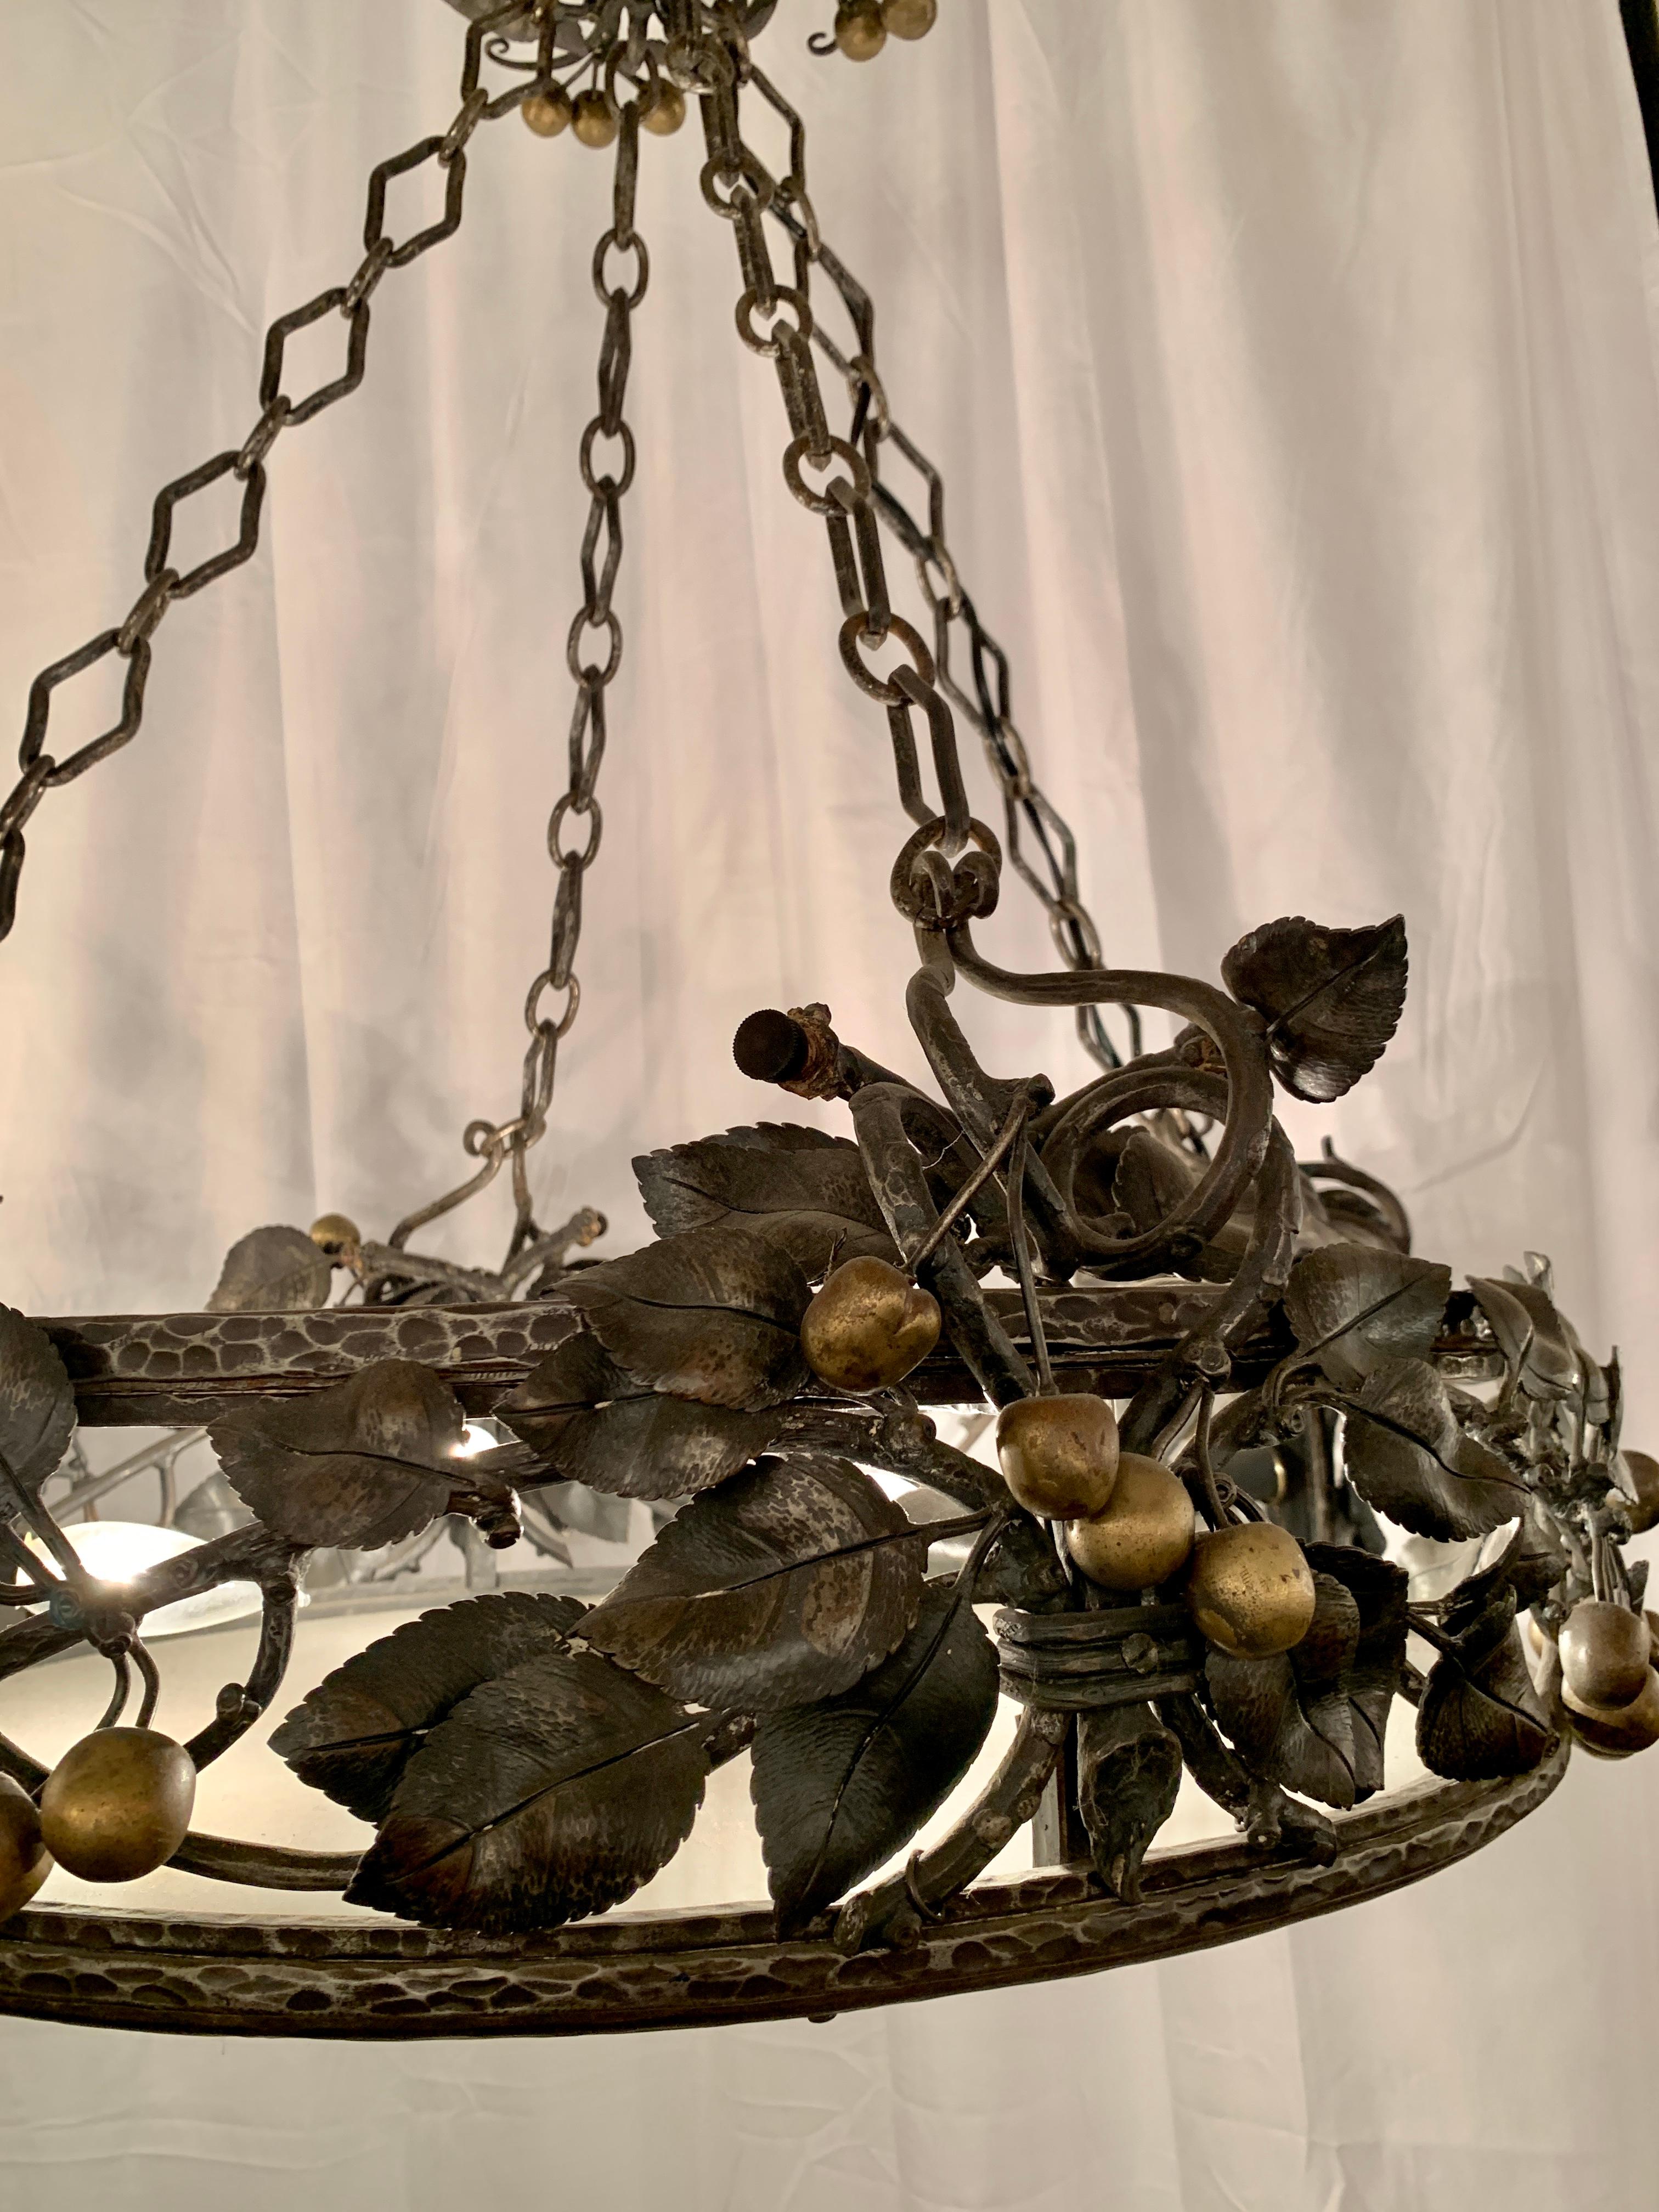 Late 19th Century Antique French Wrought Iron & Glass Chandelier, Grapes & Pears Motif, Circa 1890